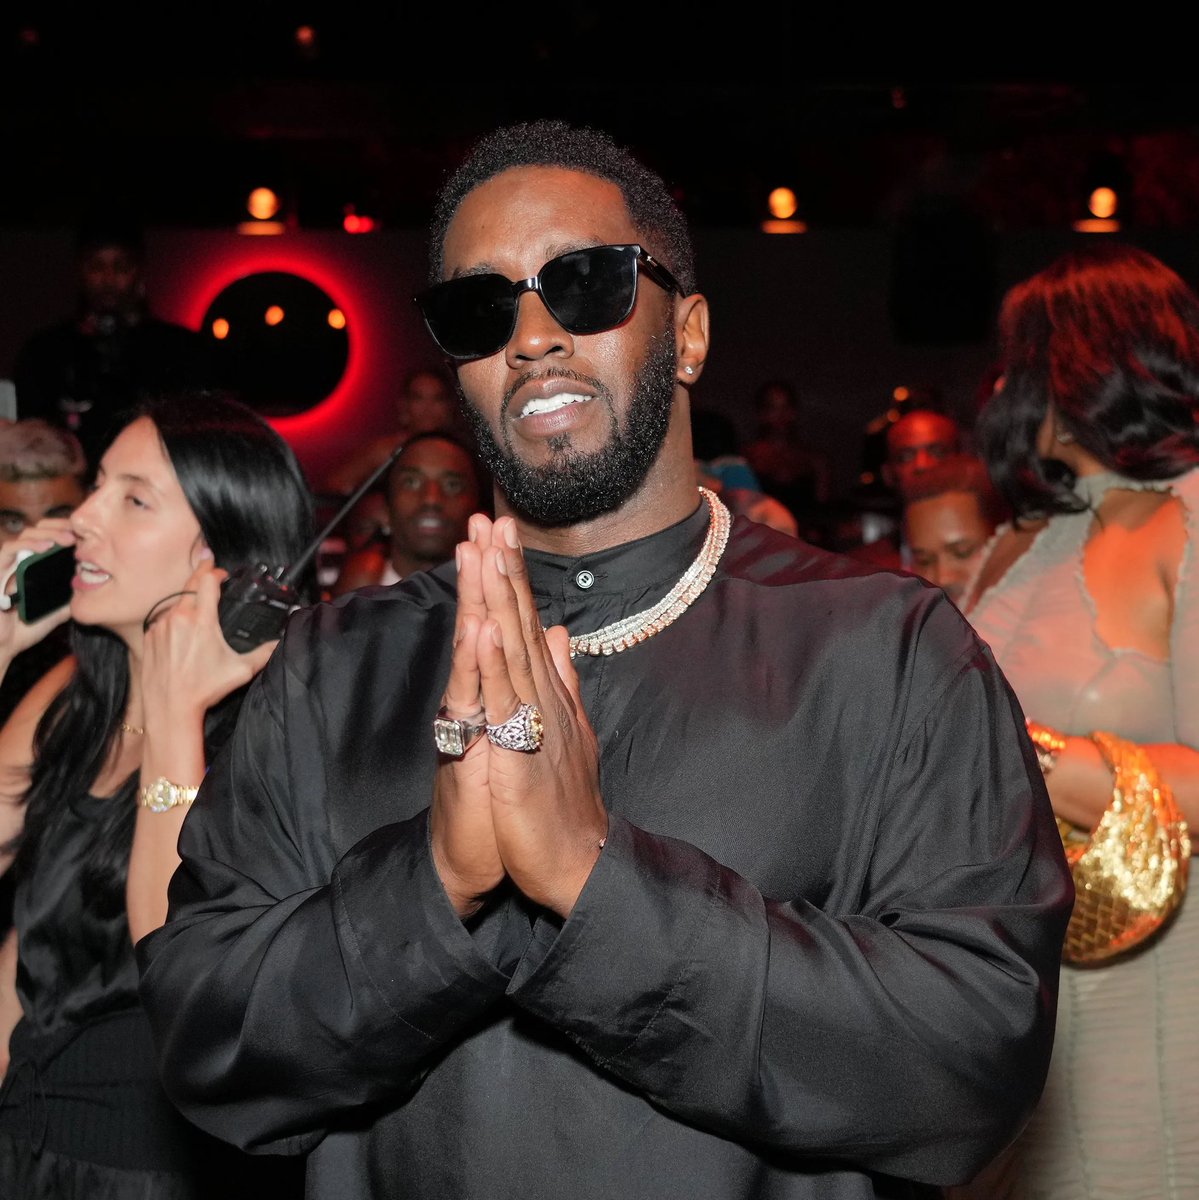 UPDATE: 18 businesses have terminated their relationships with Diddy’s new e-commerce company in light of his abuse allegations.